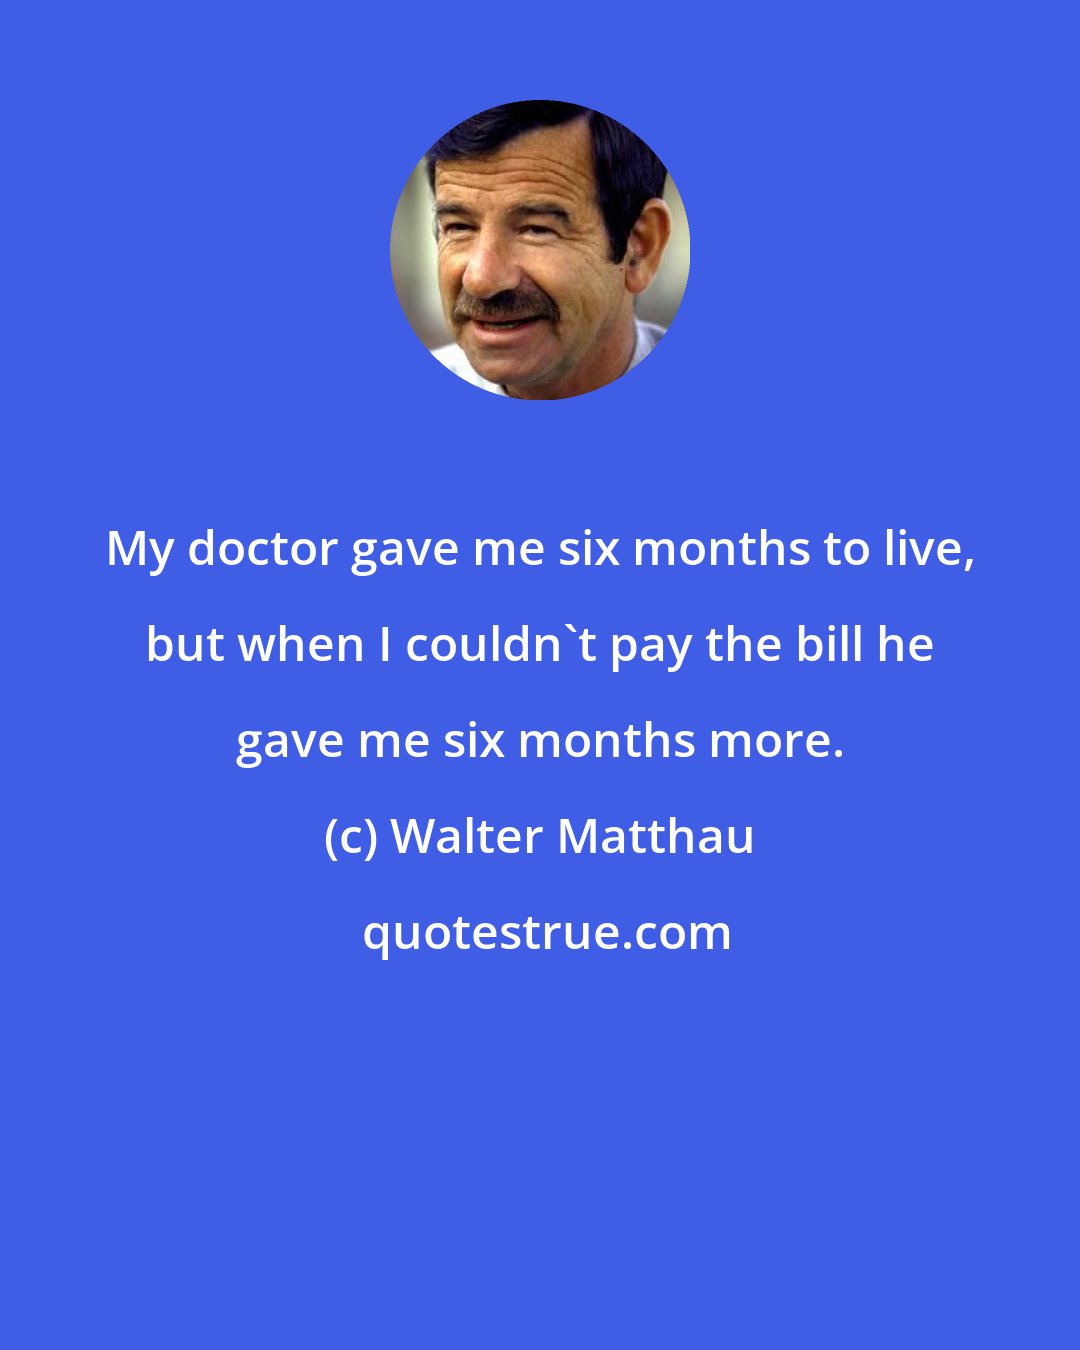 Walter Matthau: My doctor gave me six months to live, but when I couldn't pay the bill he gave me six months more.